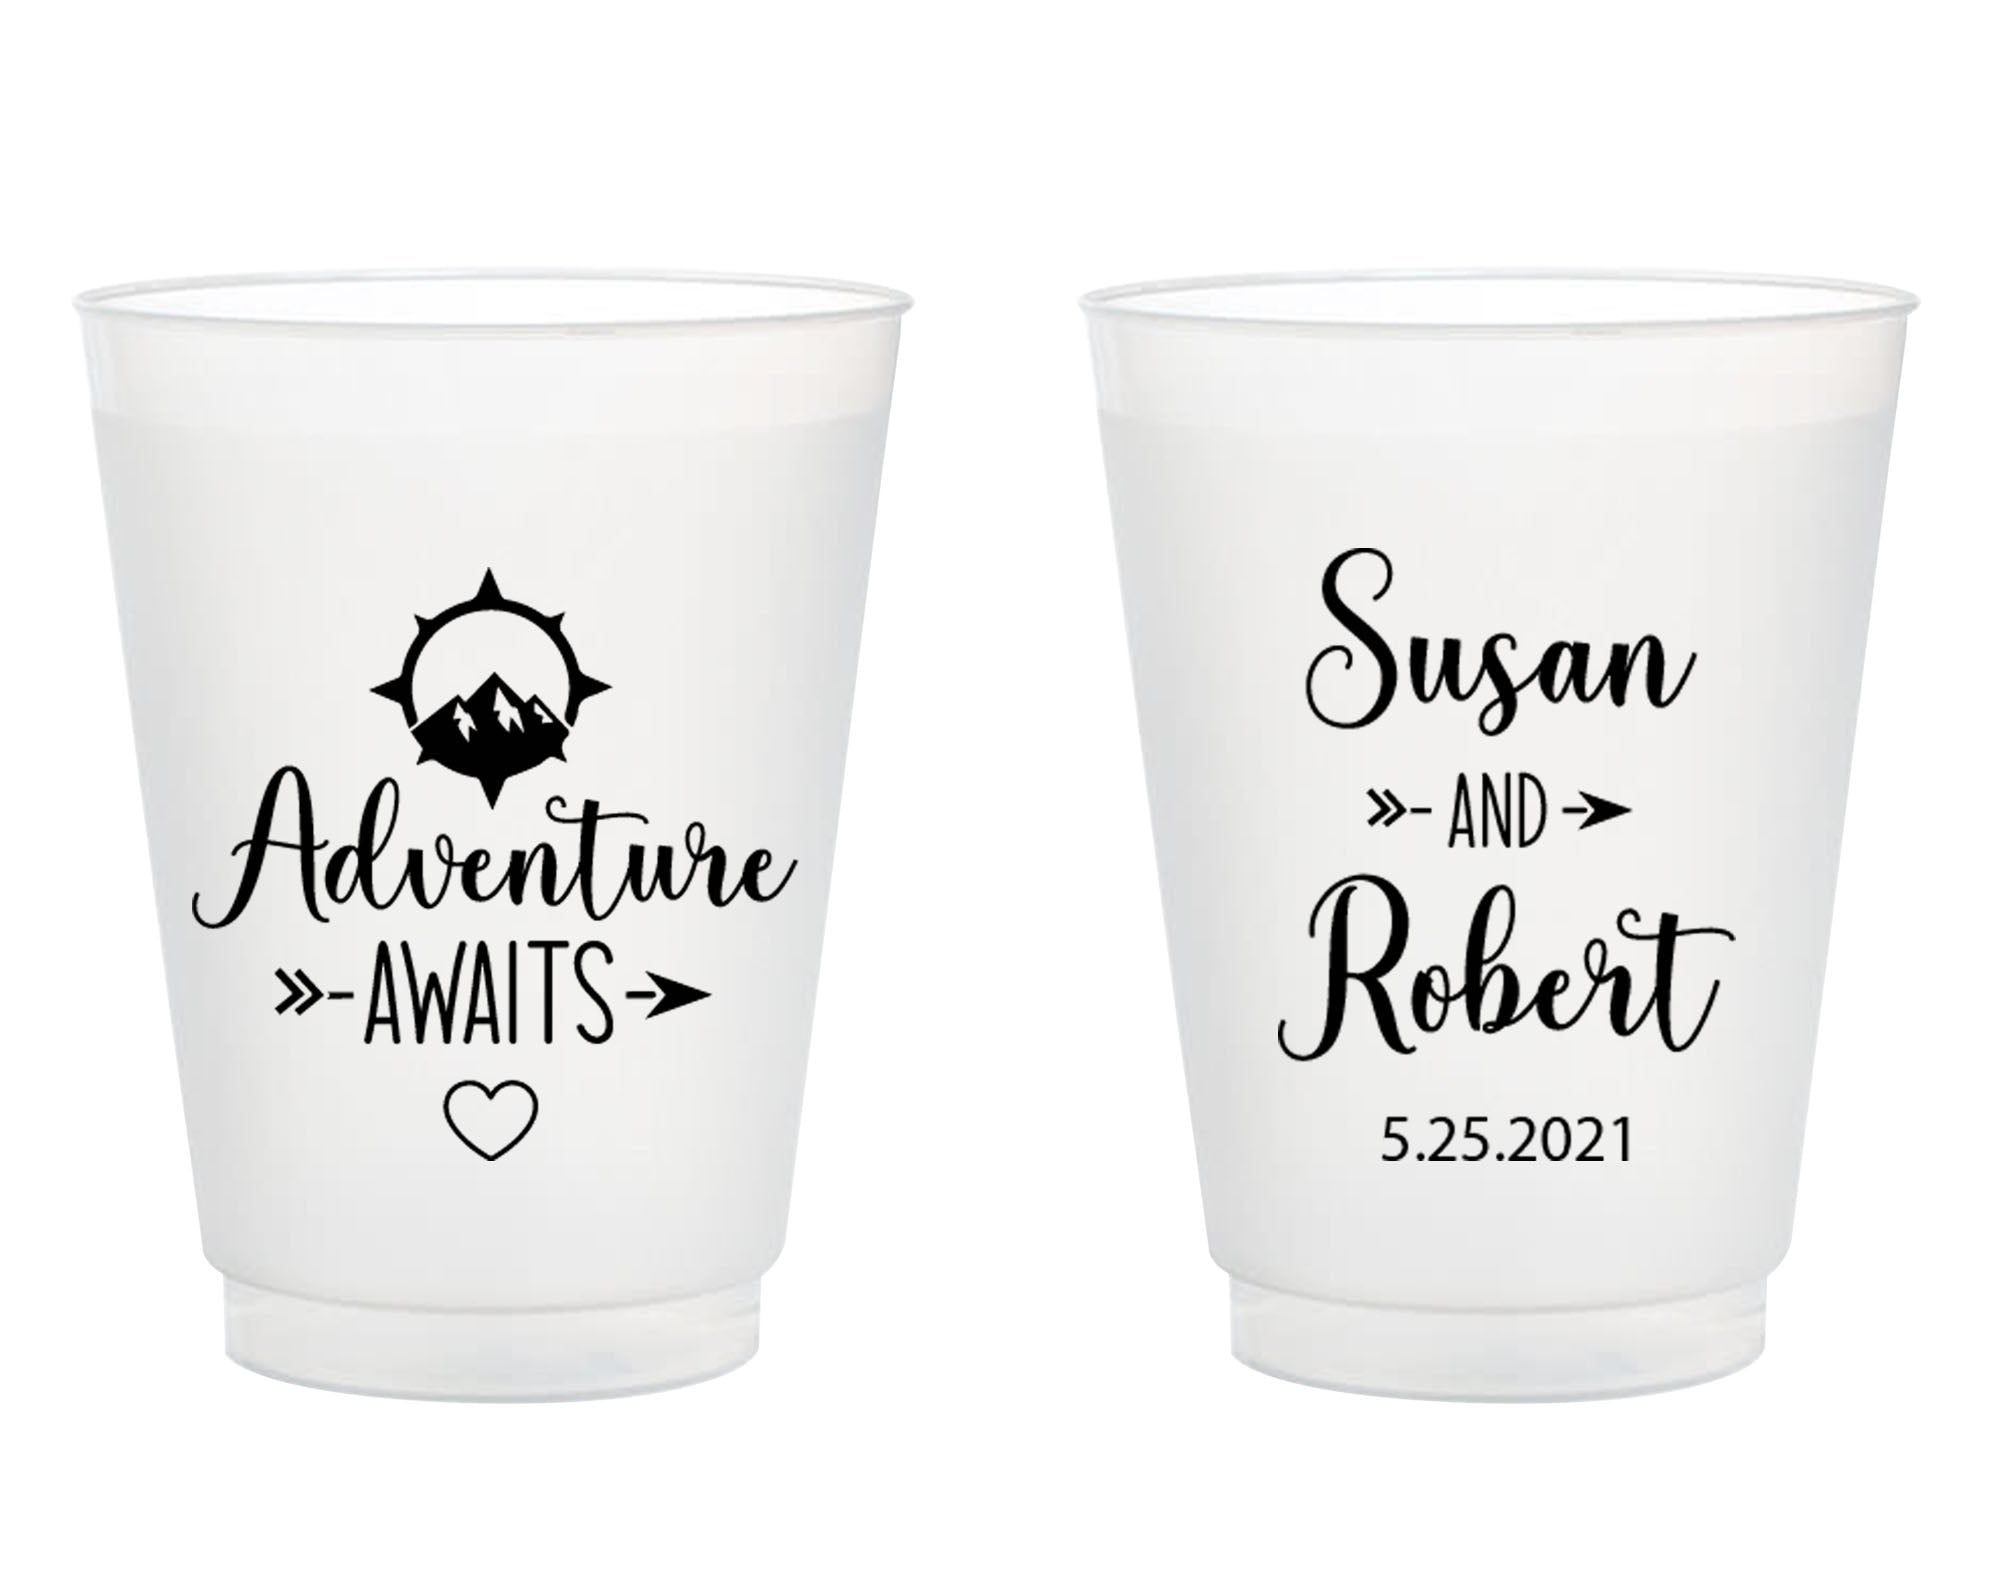 Let the Adventure Begin - 9oz Frosted Unbreakable Plastic Cup #139 - Custom  - Bridal Wedding Favors, Wedding Cups, Party Cups, Favor